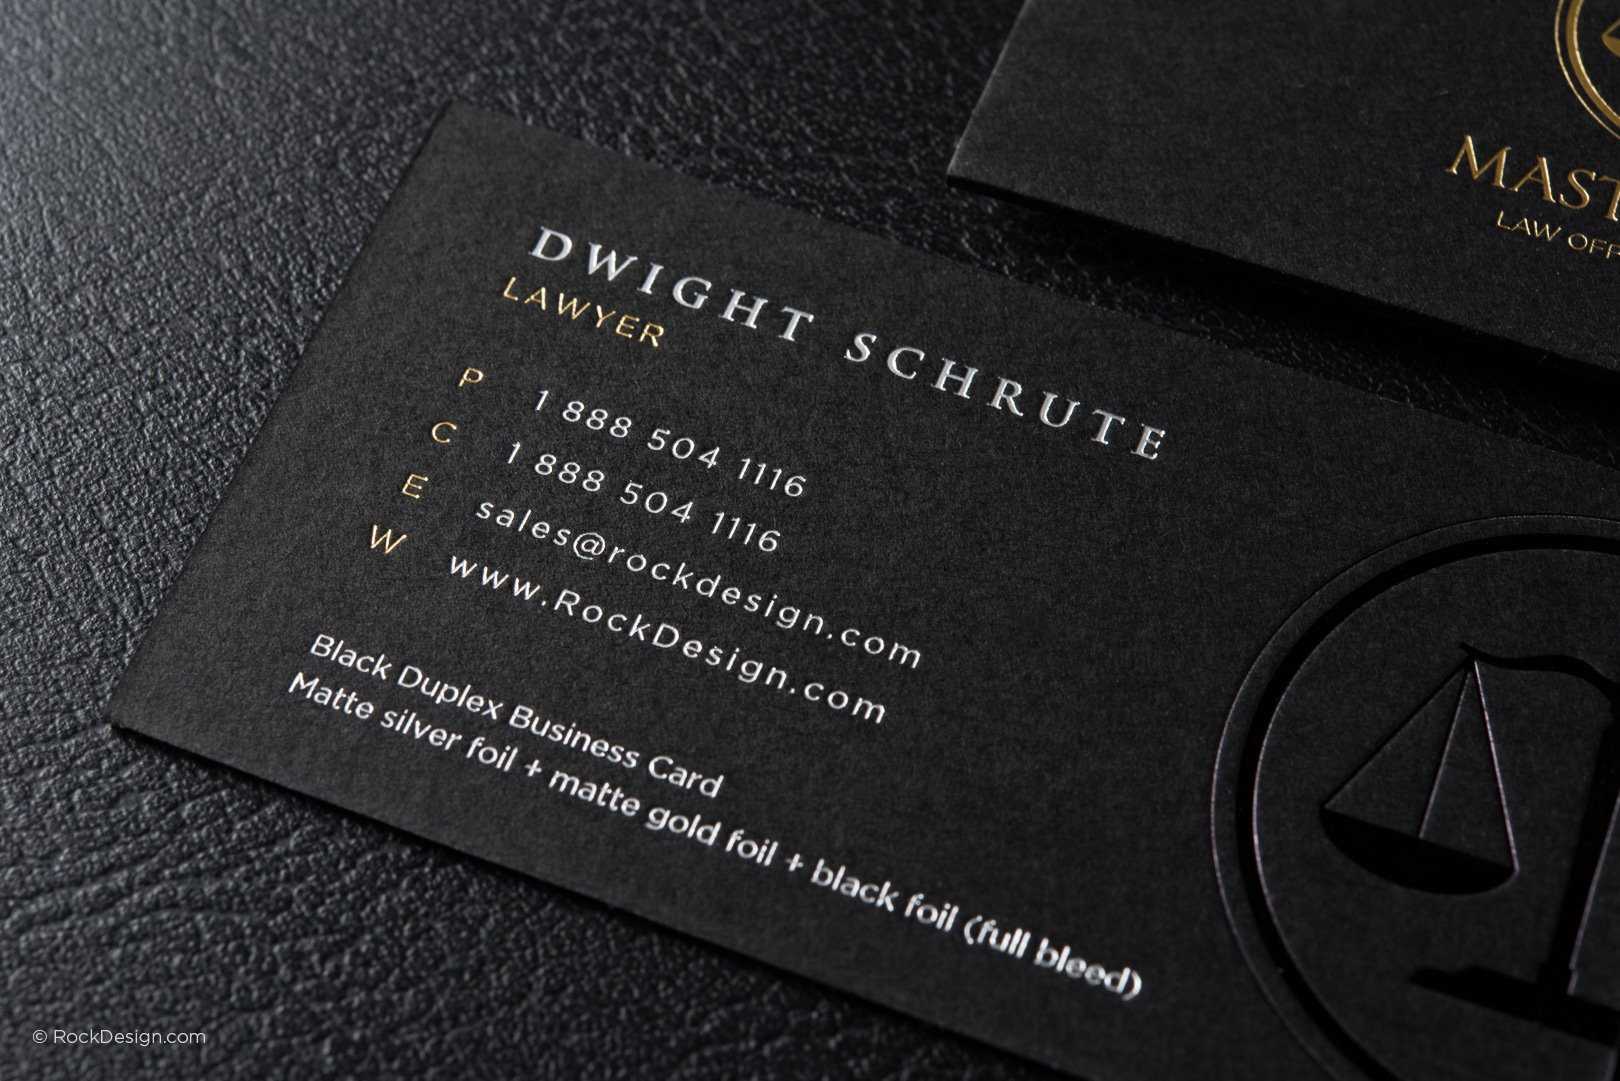 Free Lawyer Business Card Template | Rockdesign Regarding Lawyer Business Cards Templates